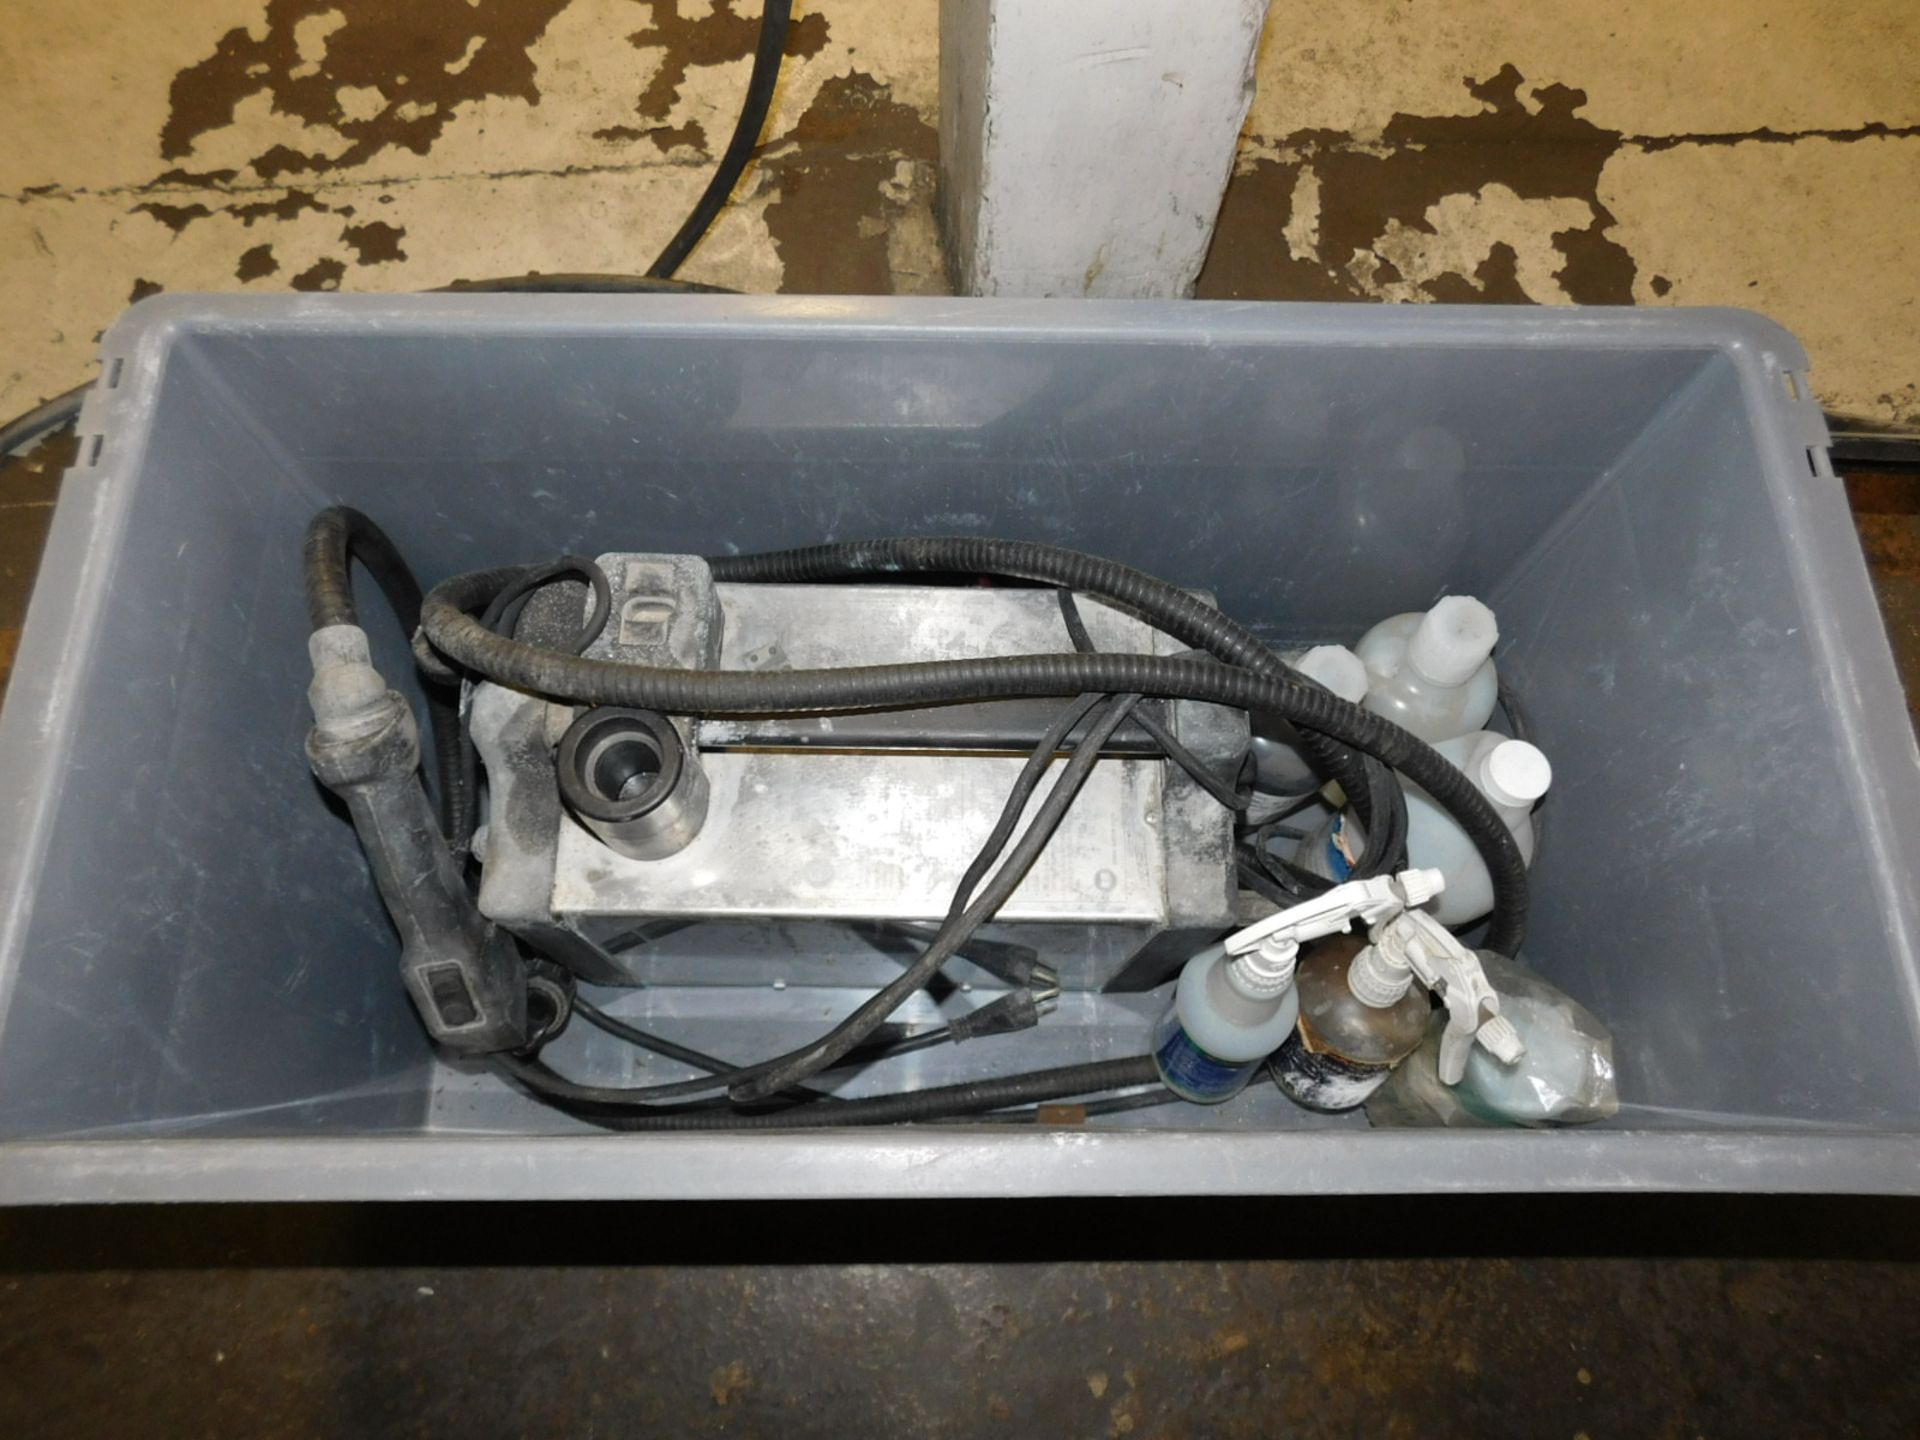 SURFOX WELD CLEANING SYSTEM